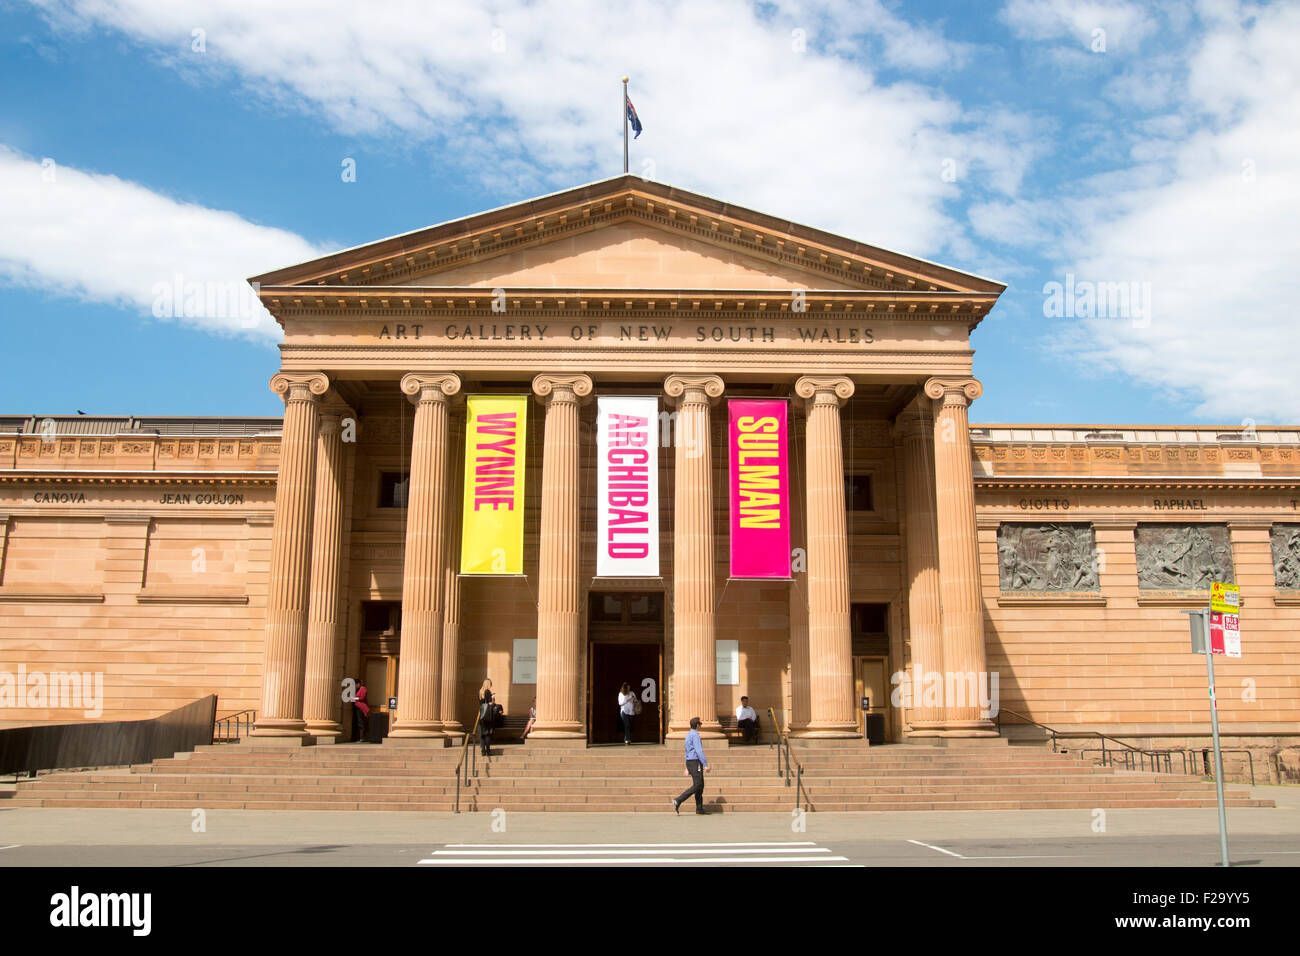 Exterior Art Gallery of New South Wales located in Sydney,Australia with banners promoting Archibald,Wynne and Sir John Sulman art prize Stock Photo